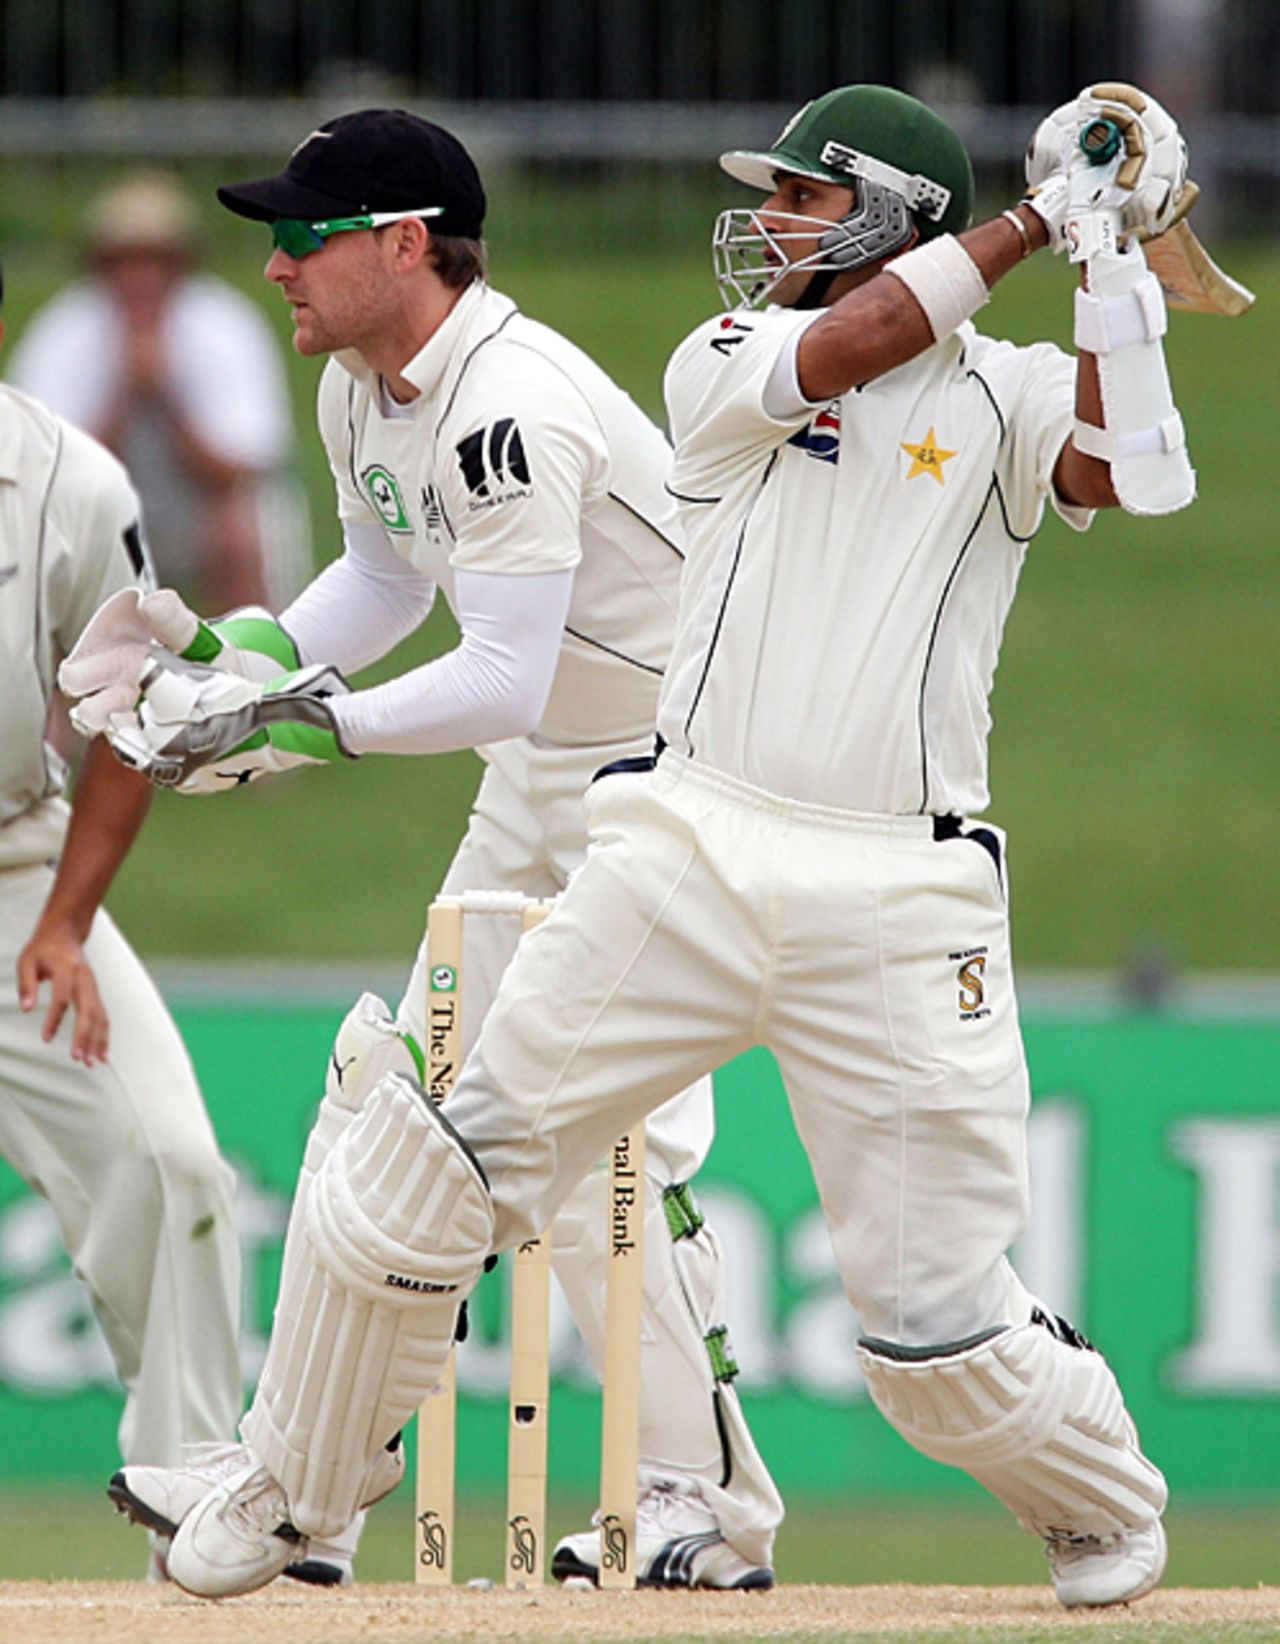 Faisal Iqbal cuts as Pakistan chip away at the lead, New Zealand v Pakistan, 3rd Test, Napier, 4th day, December 14, 2009